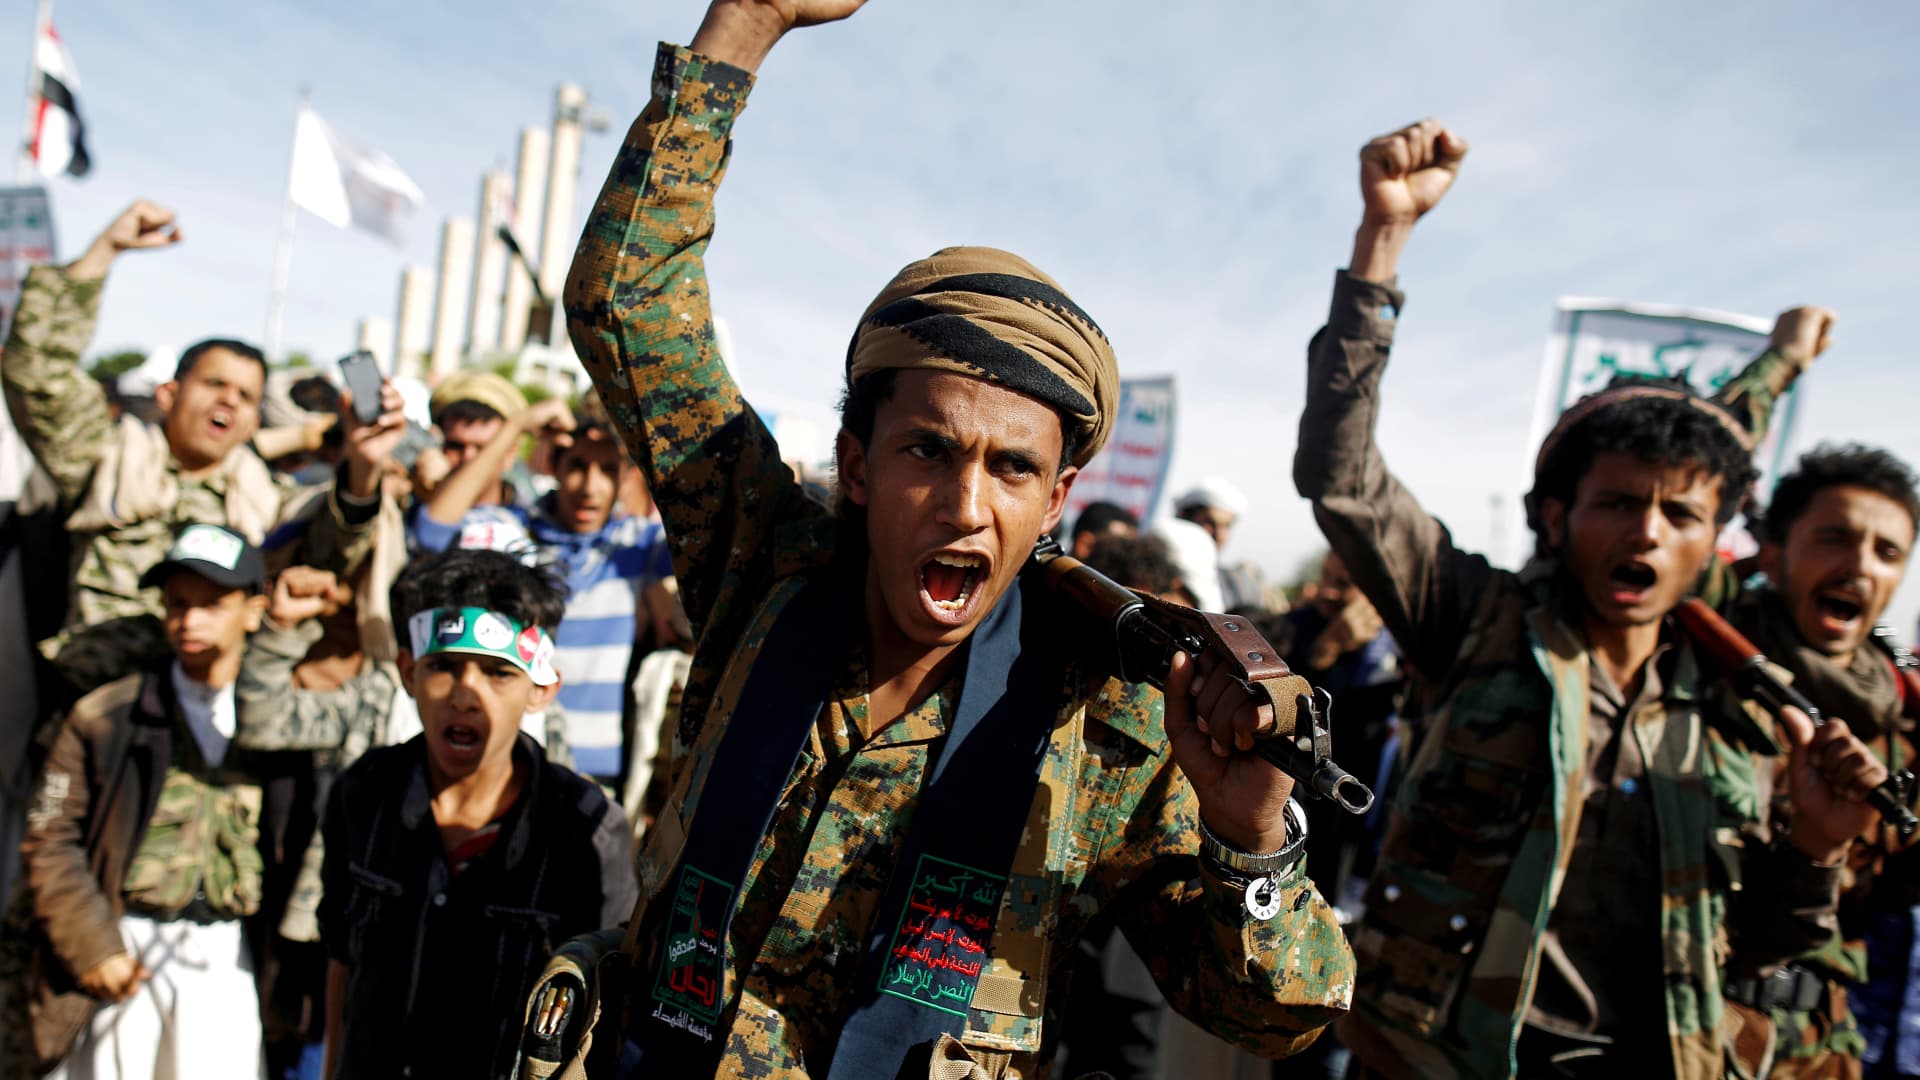 Supporters of the Houthi movement shout slogans as they attend a rally to mark the 4th anniversary of the Saudi-led military intervention in Yemen's war, in Sanaa, Yemen March 26, 2019.